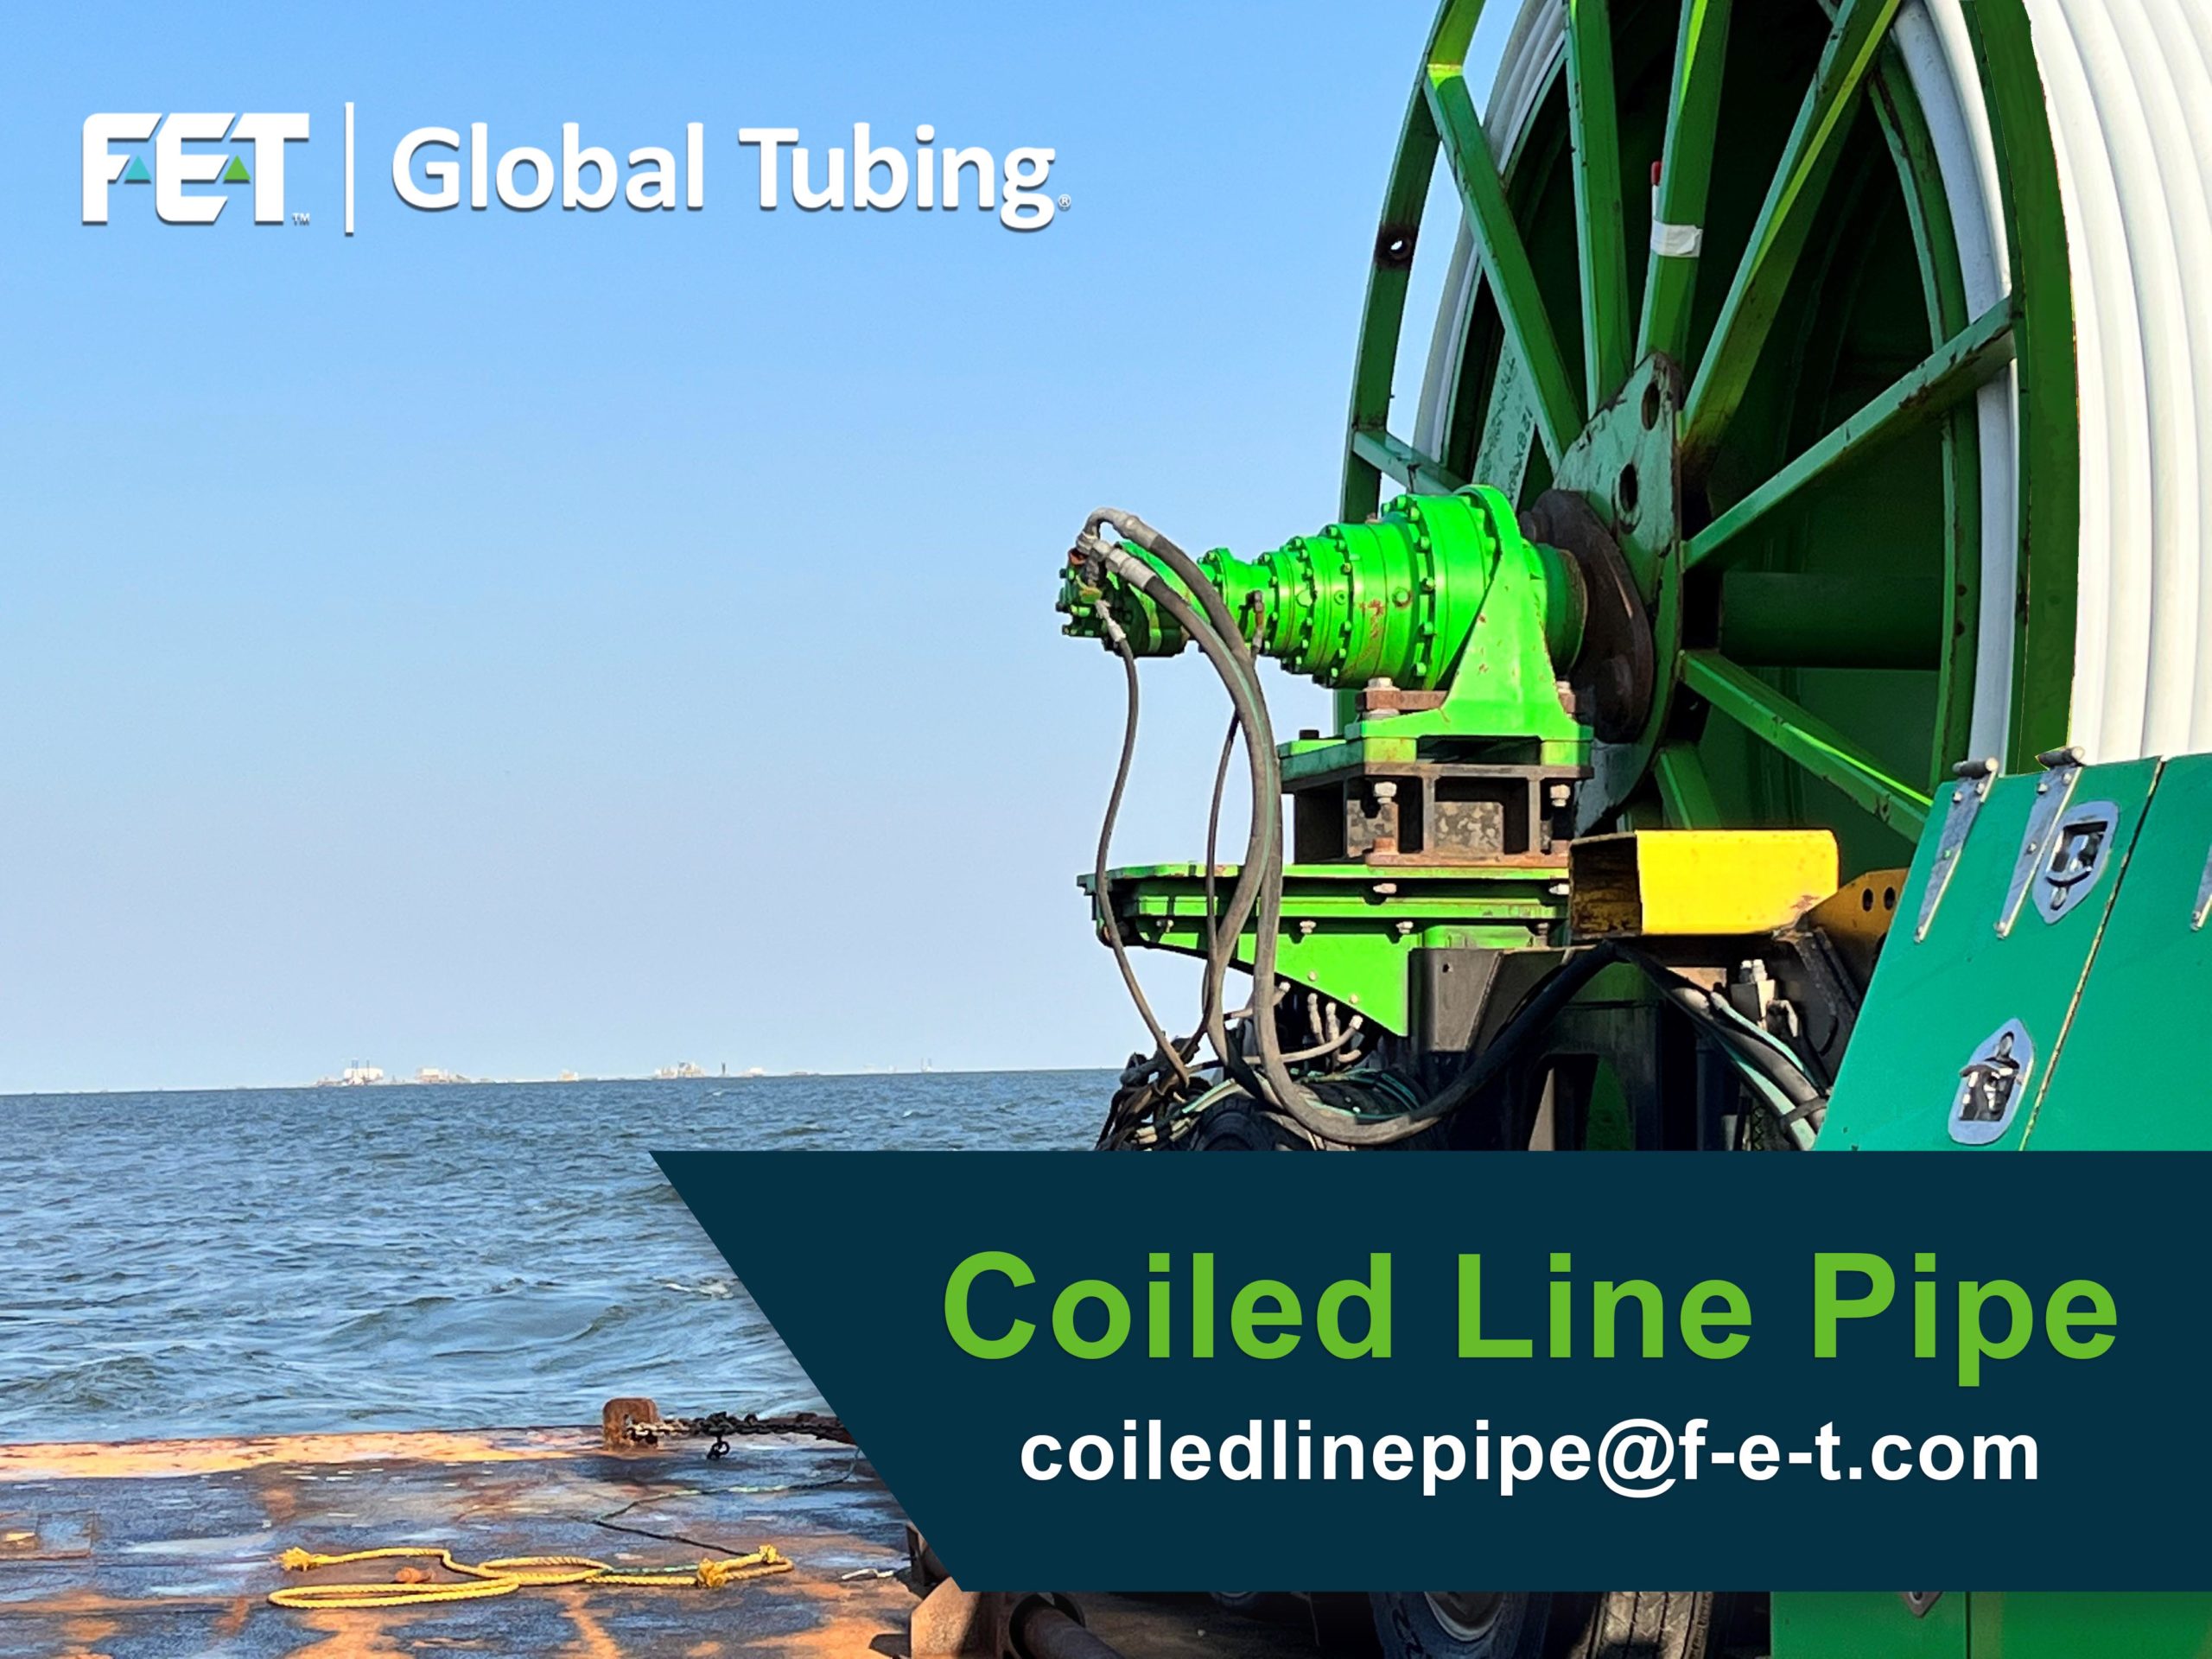 Global Tubing Coiled Line Pipe in the coastal waters of South Louisiana’s Terrebonne Bay